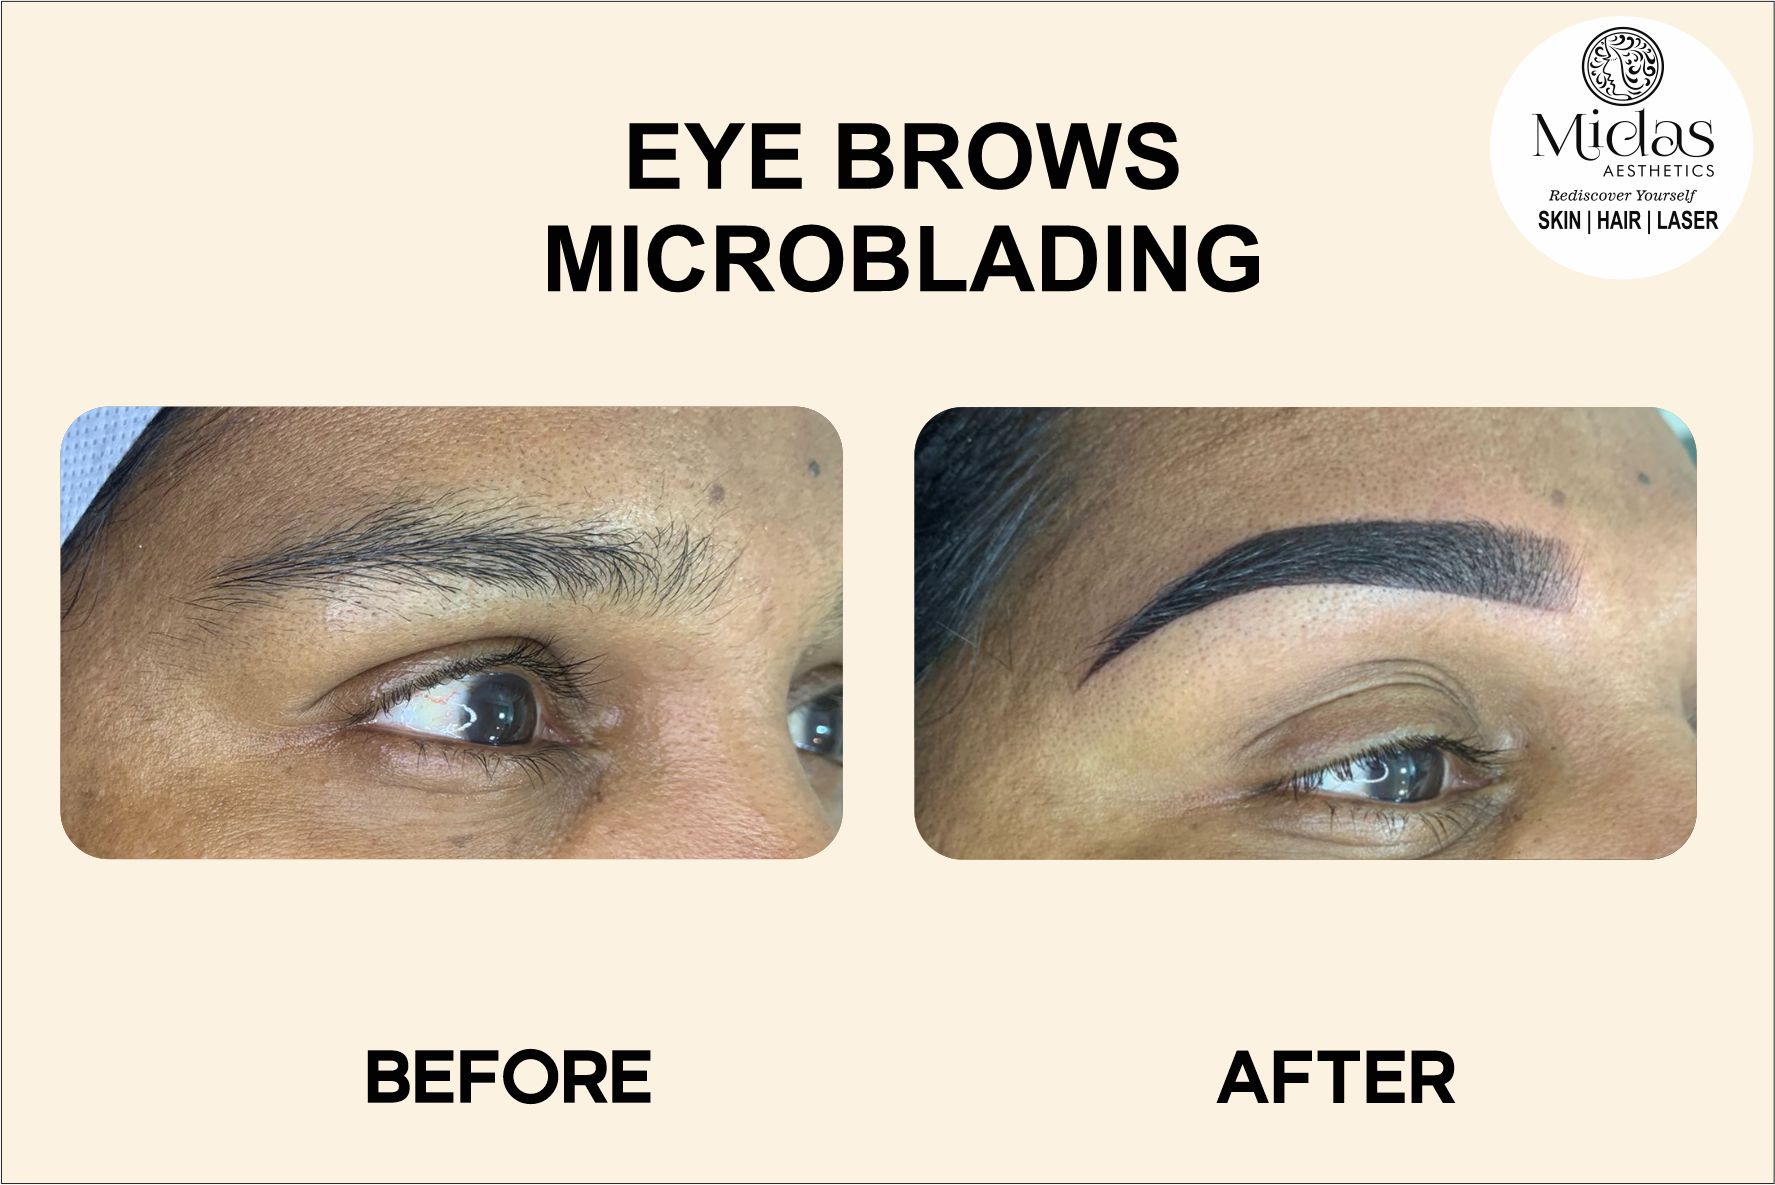 Eye brows Microblading before and after images